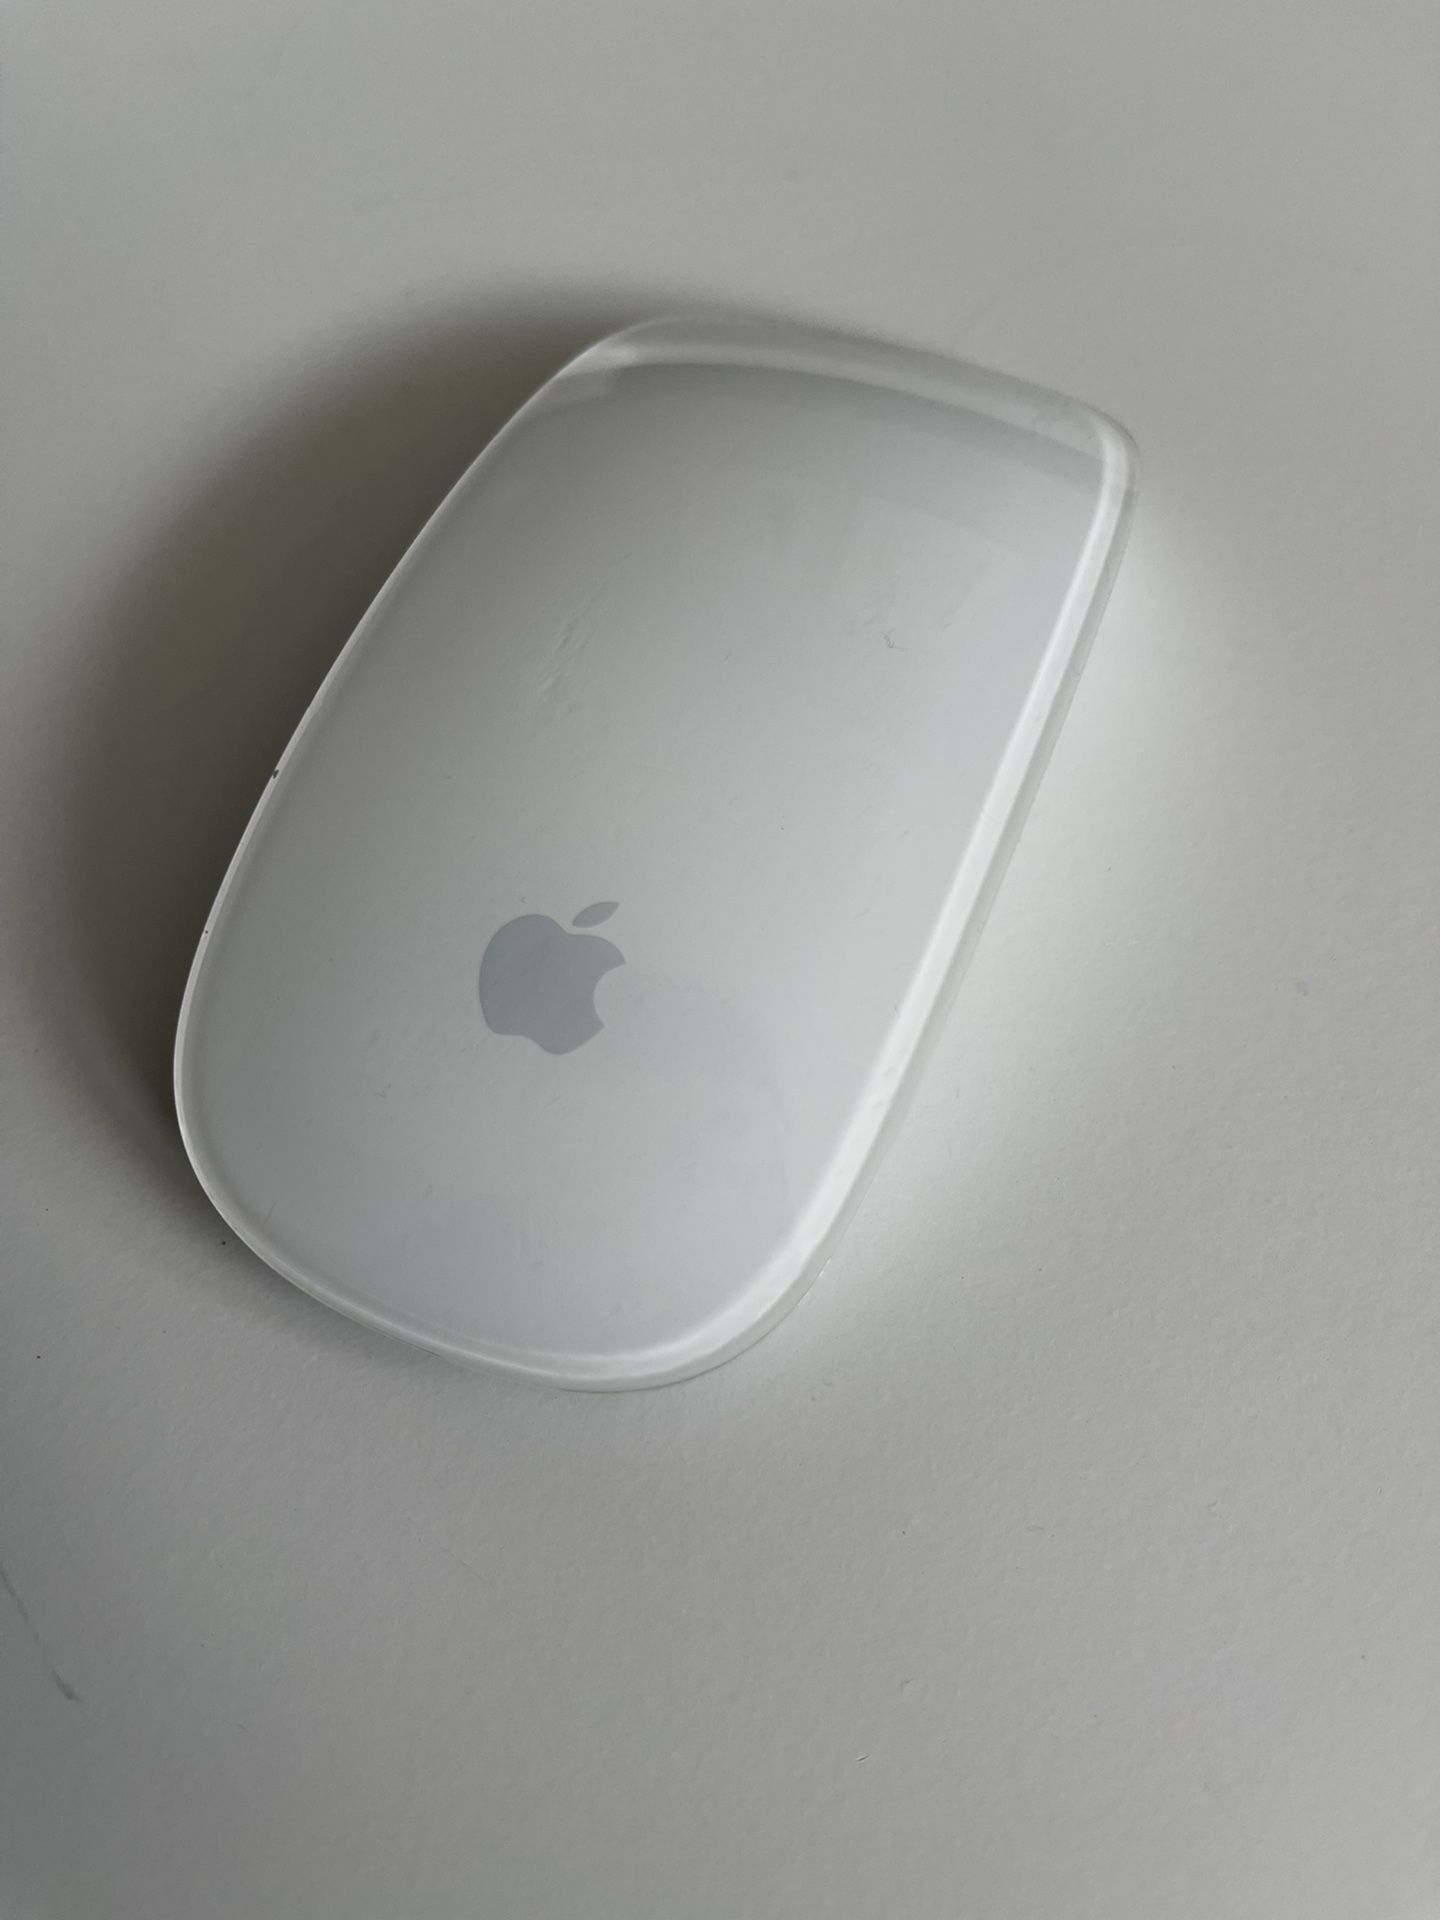 Apple Magic Mouse (old generation)